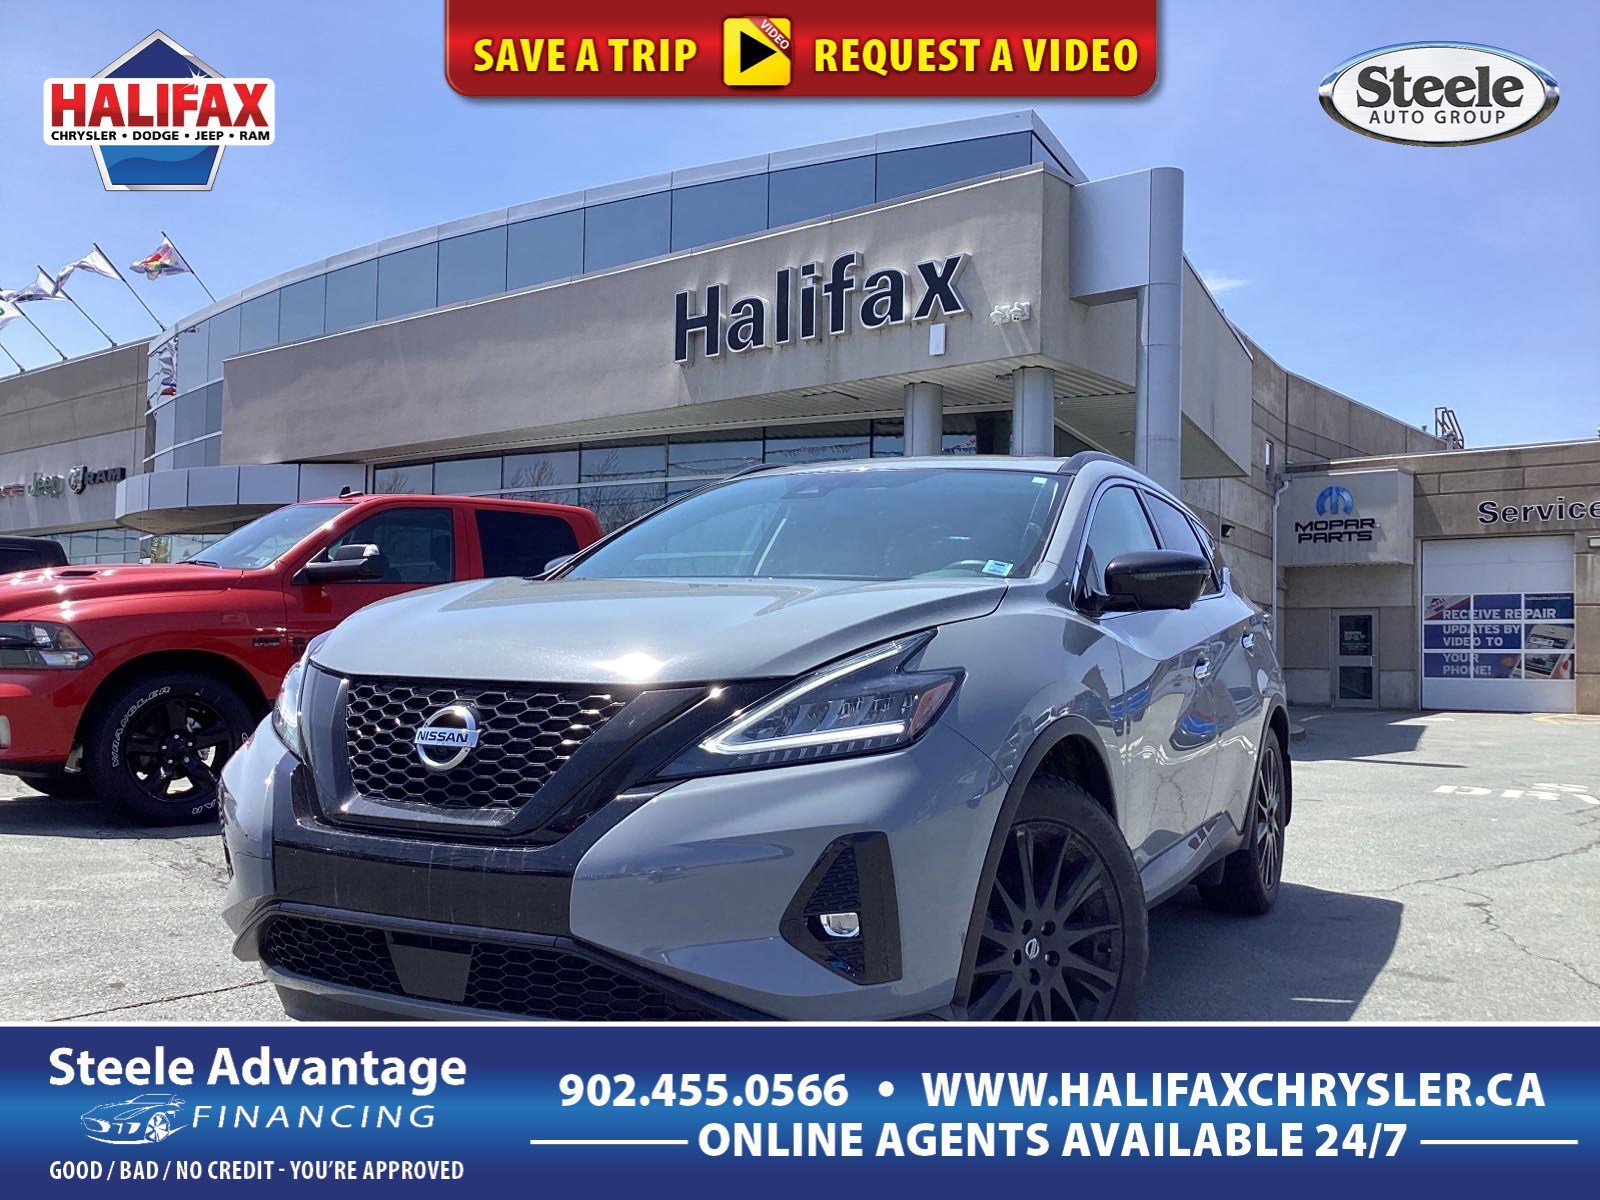 2021 Nissan Murano MIDNIGHT EDITION - LOW KM, HTD MEM LEATHER SEATS A